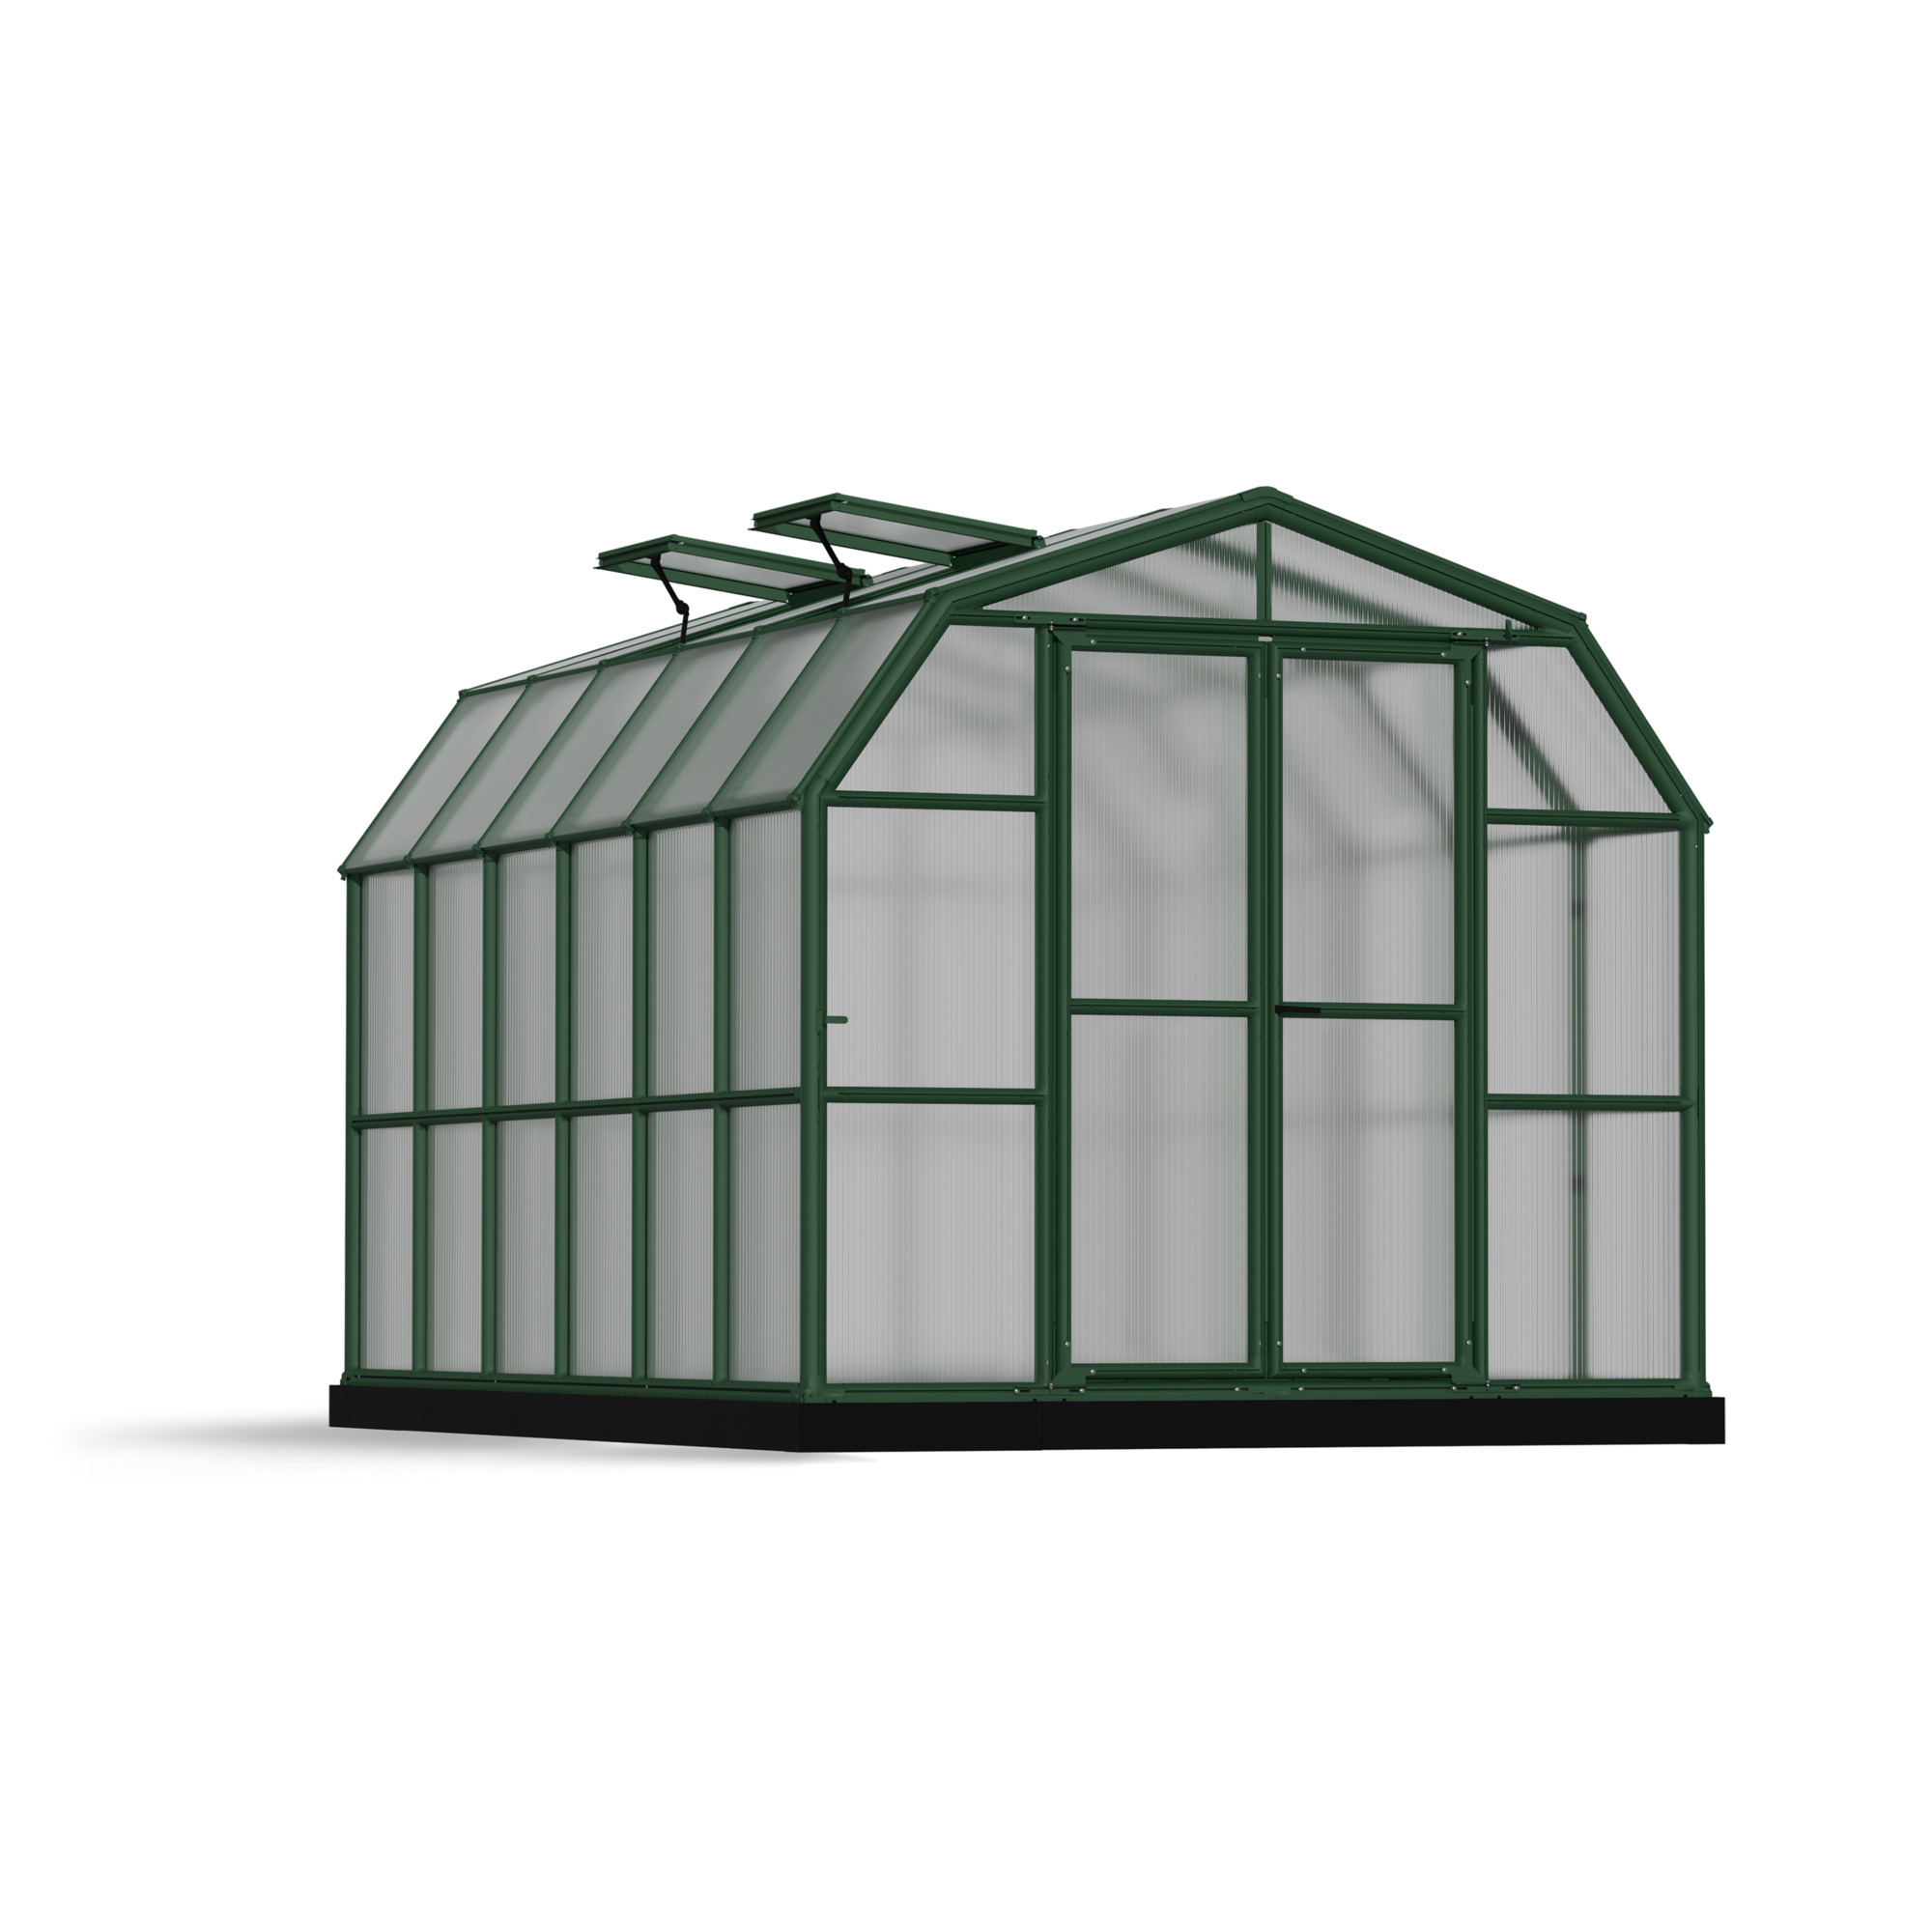 Poly-Tex Inc., Grand Gardener 8ft. x 12ft. Greenhouse - Twin Wall, Length 153.1 in, Width 105.1 in, Center Height 93.5 in, Model 702488